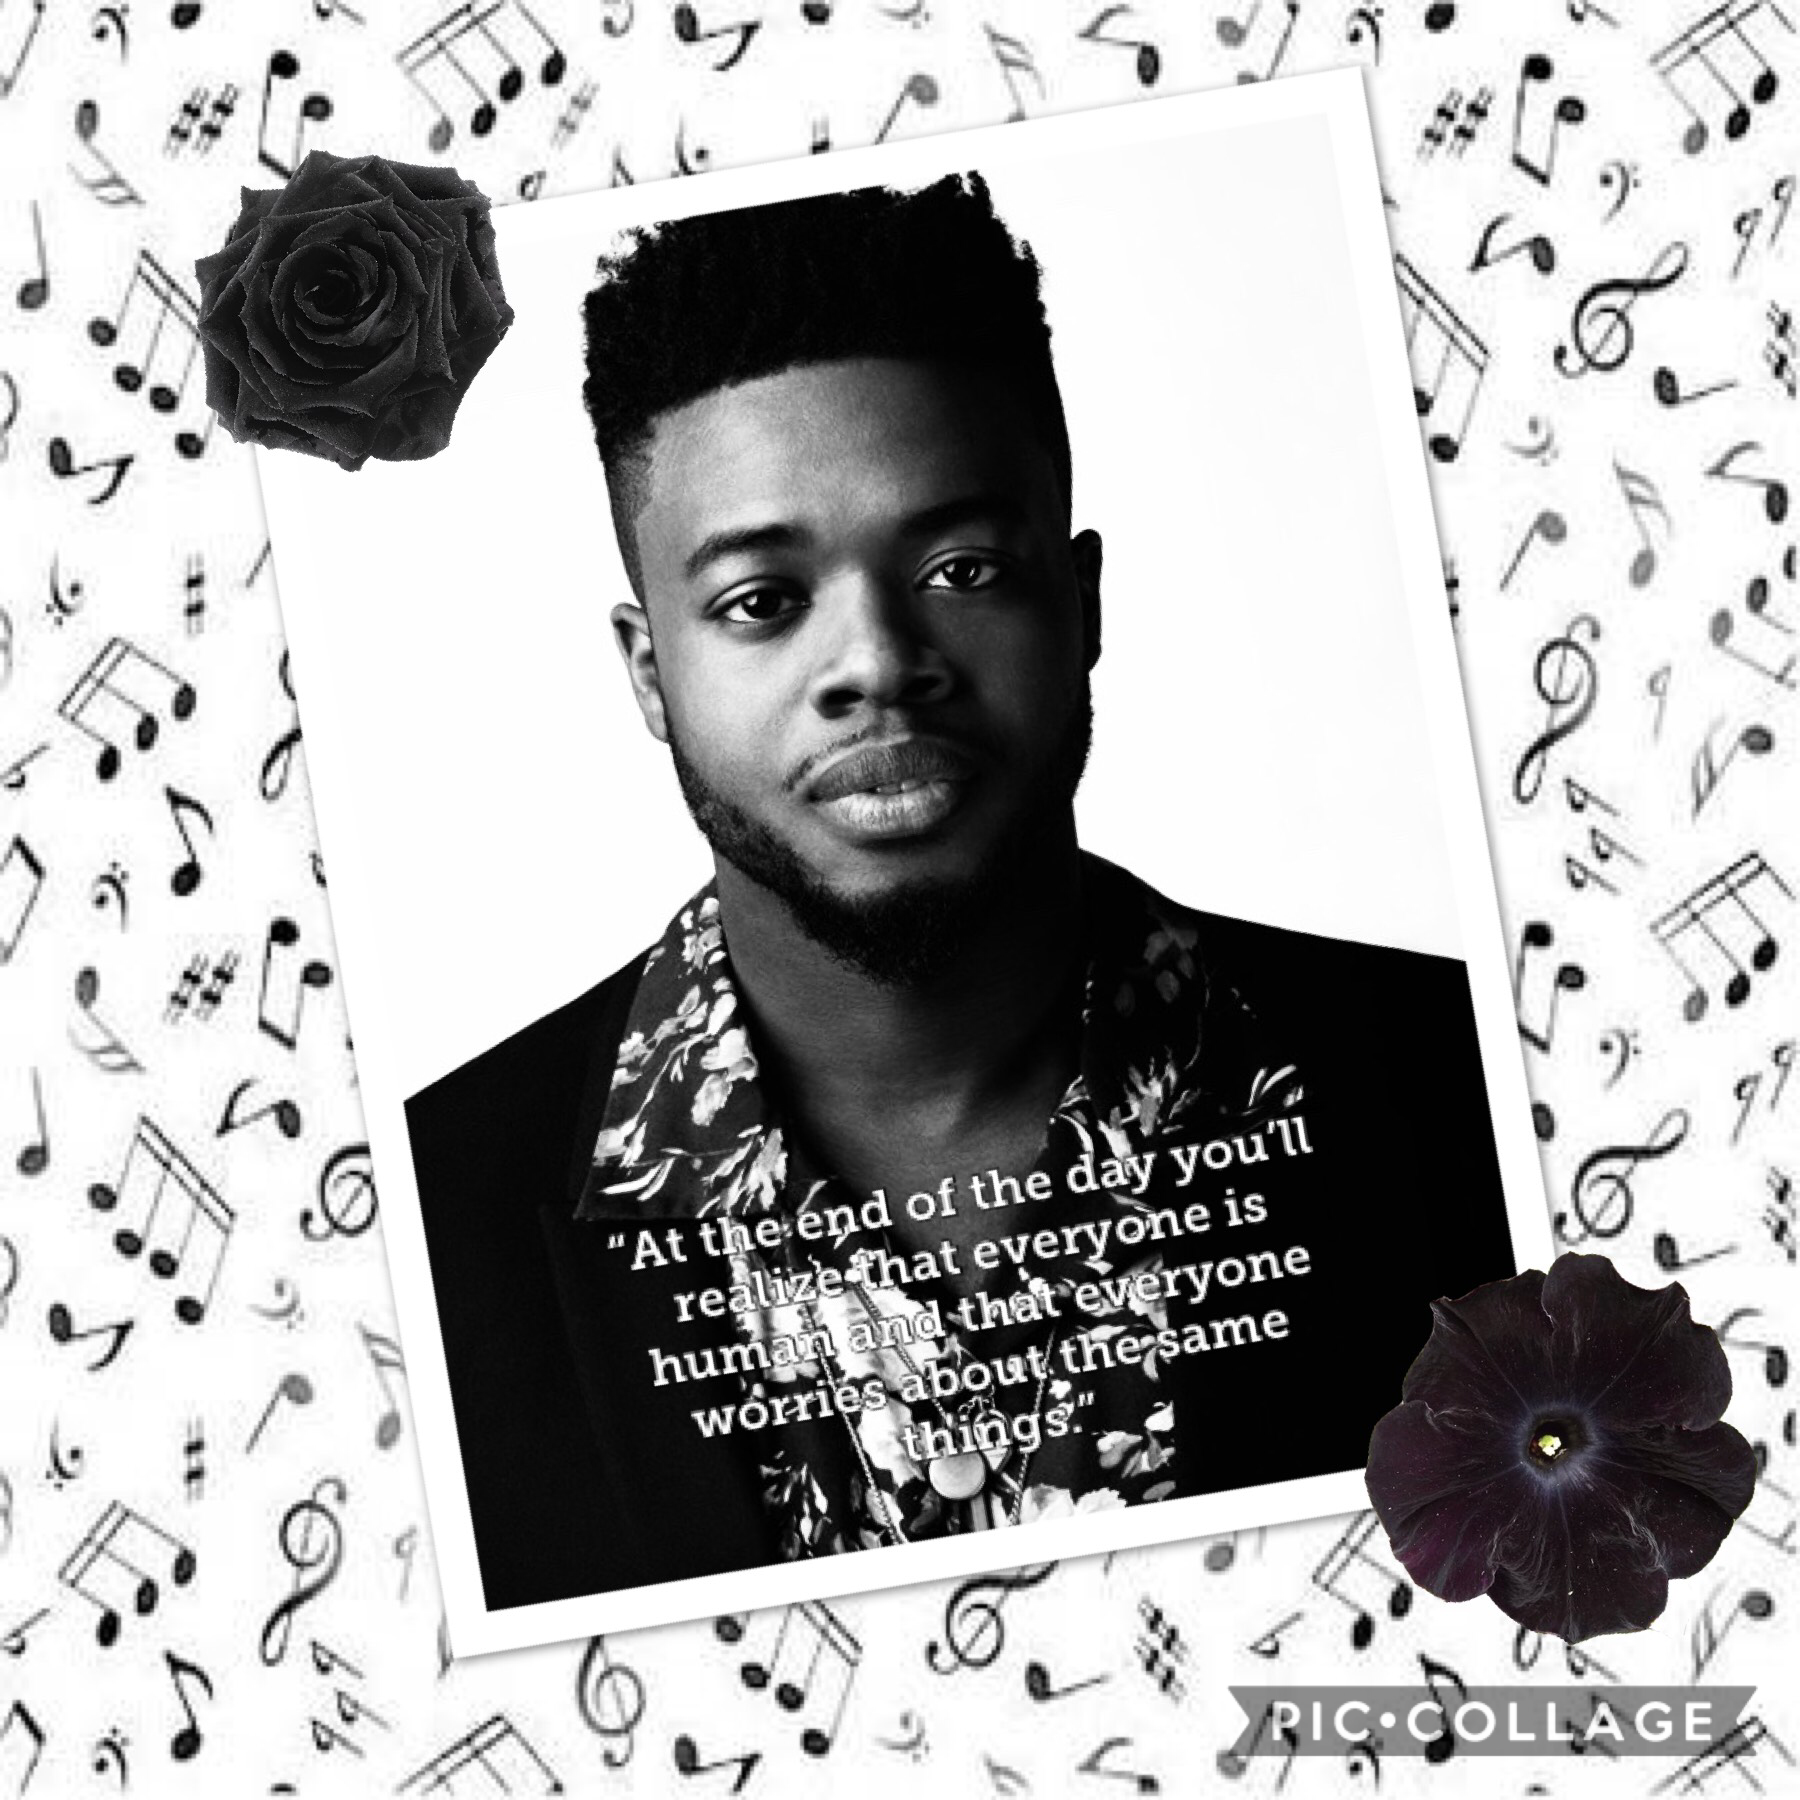 🖤Tap🖤

This one is for the Incredibly talented Kevin Olusola. He is not only a member of Pentatonix but has his own solo career as well. He can sing, beatbox, play cello, and is fluent in Chinese. He’s so talented and amazing.